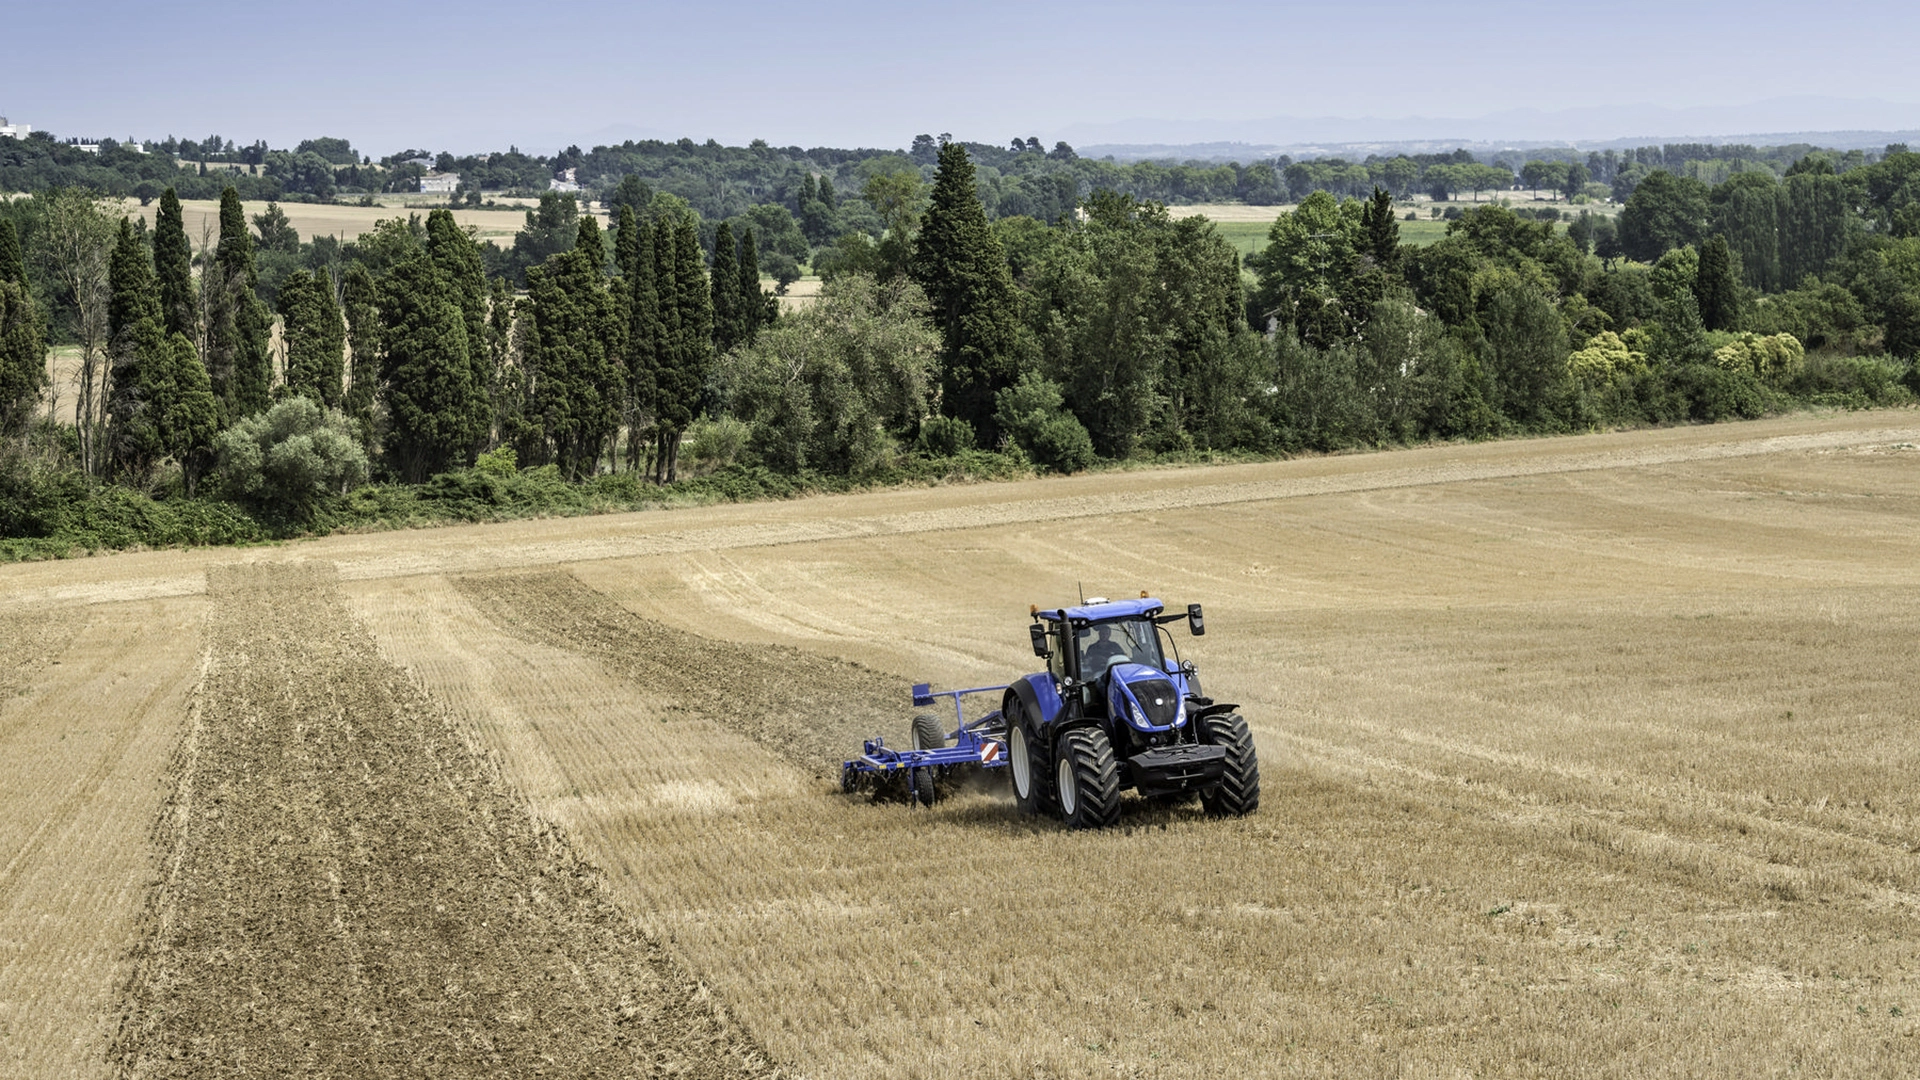 New Holland tractor employing a mounted stubble cultivator with Spring Tine Cultivator, discs and rear rollers on the field